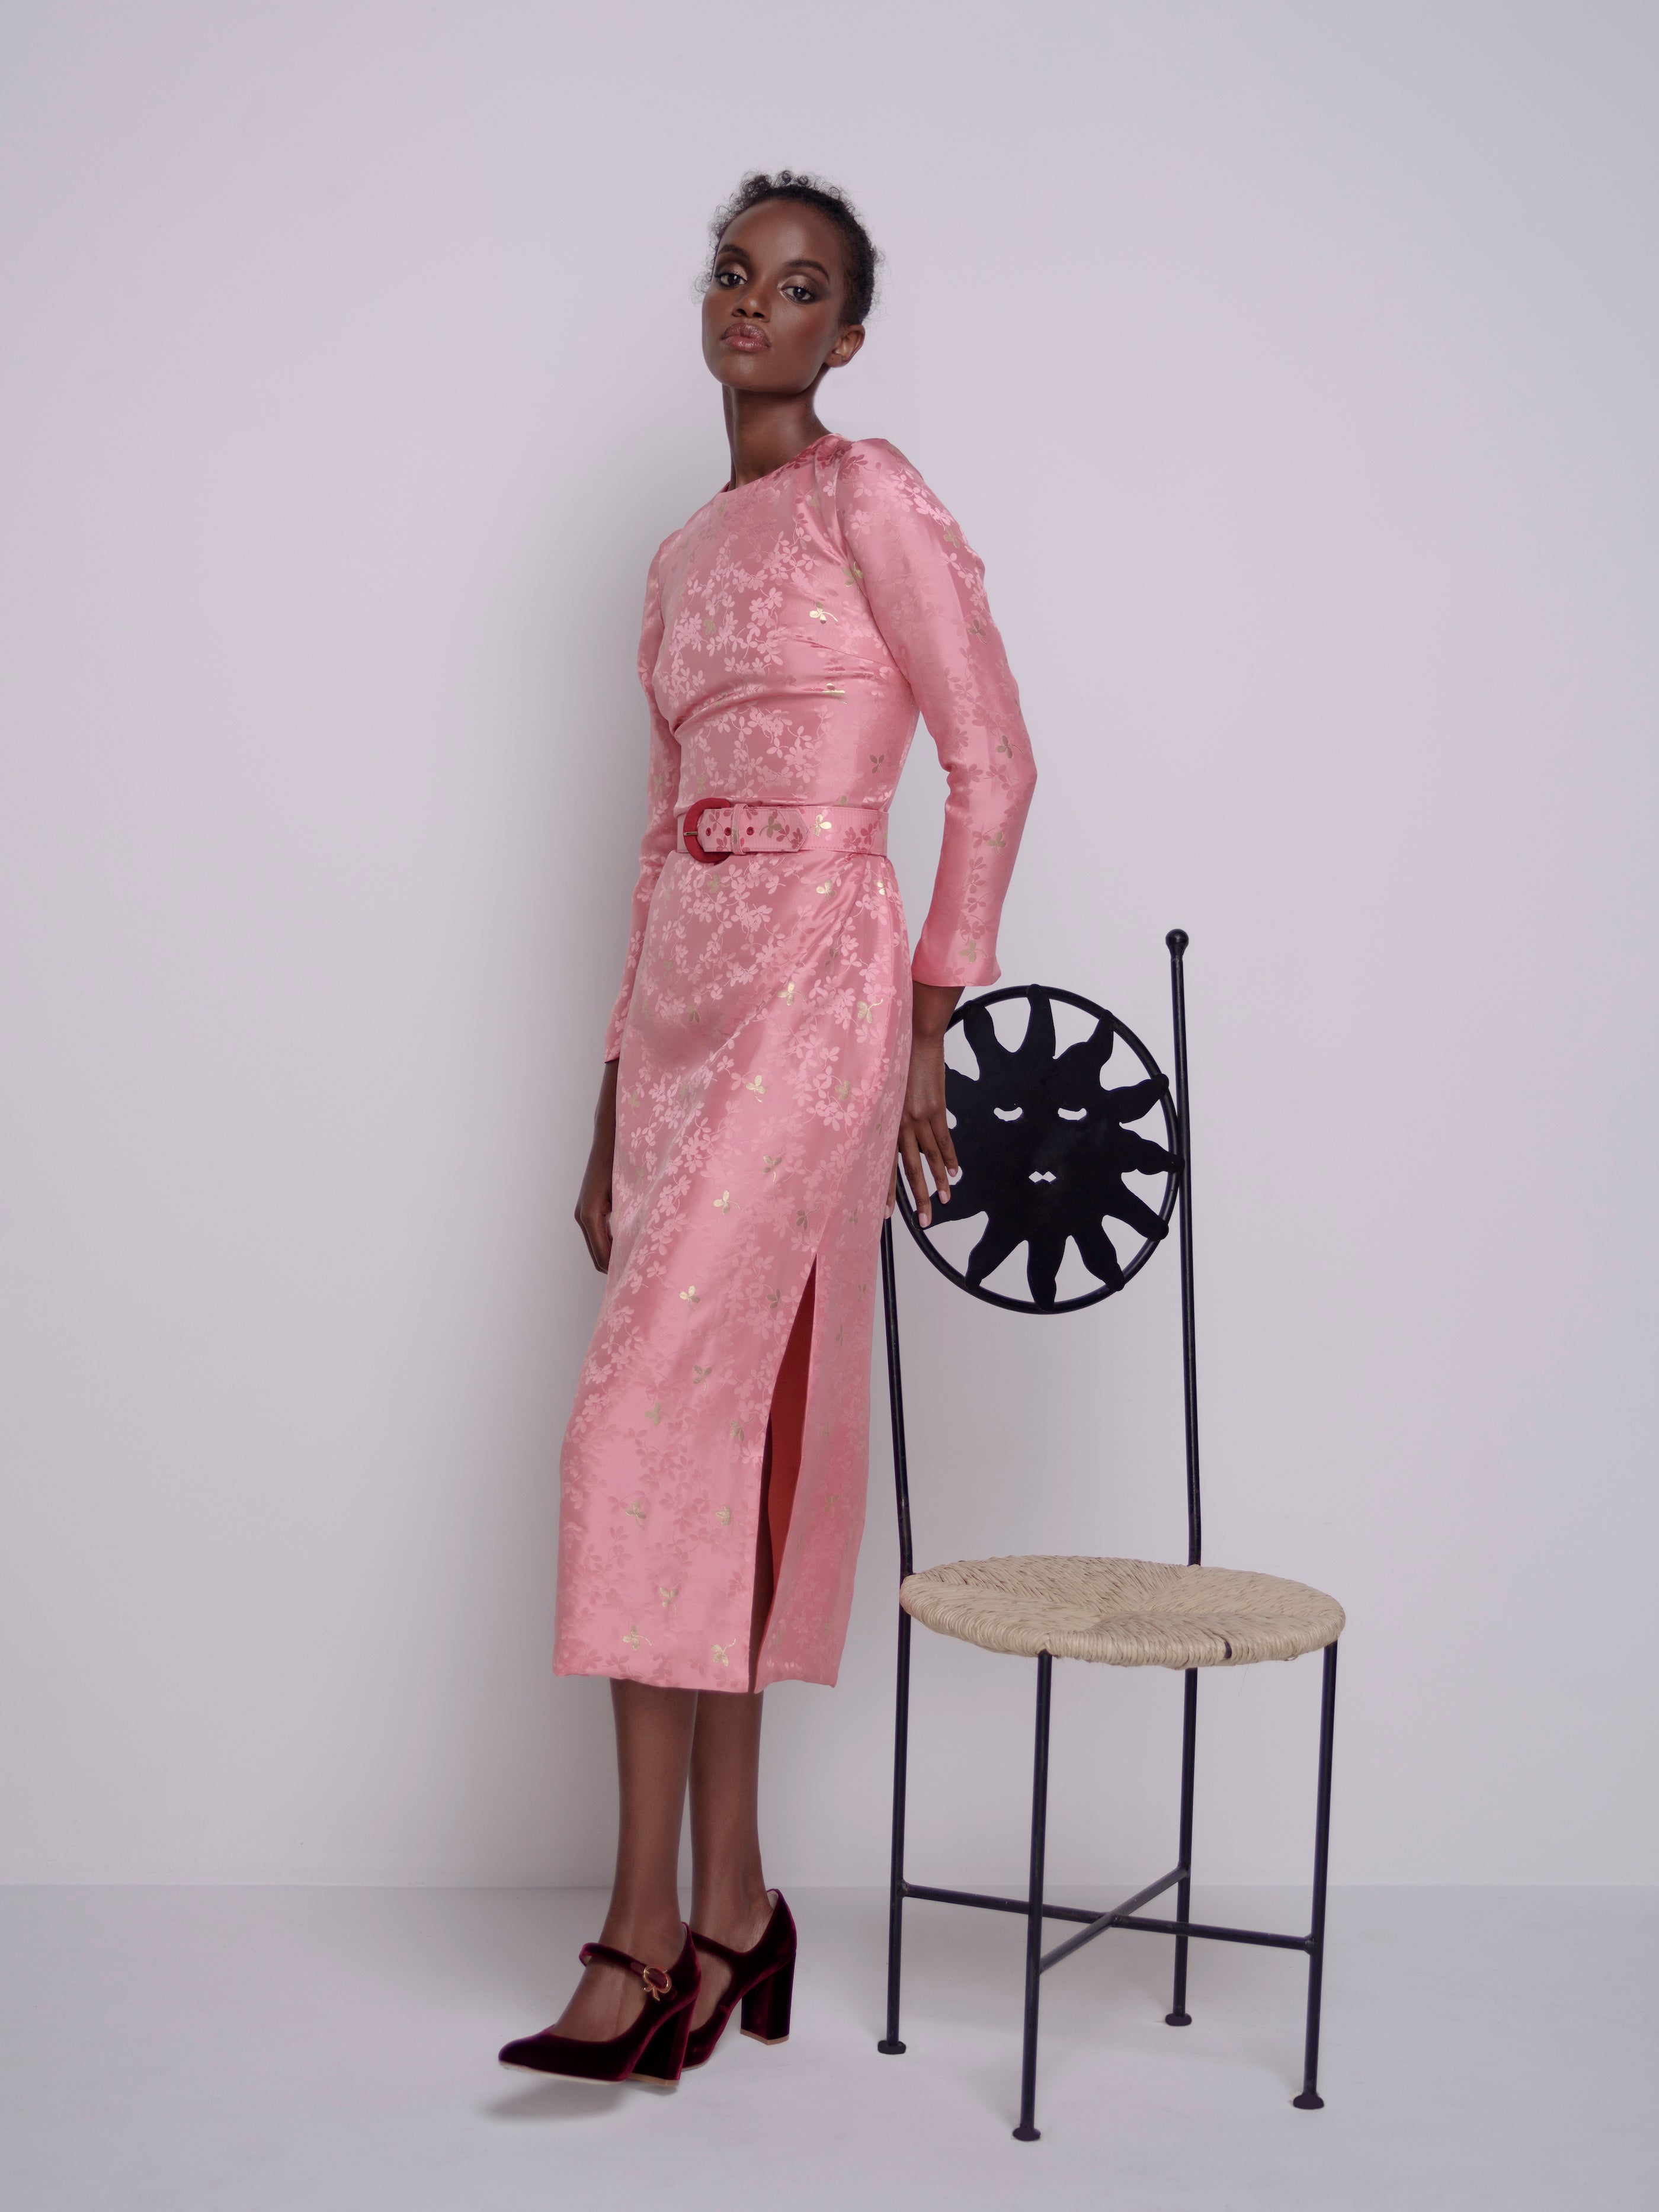 Arizona Dusty Pink Floral Long Sleeve Belted Midi Dress